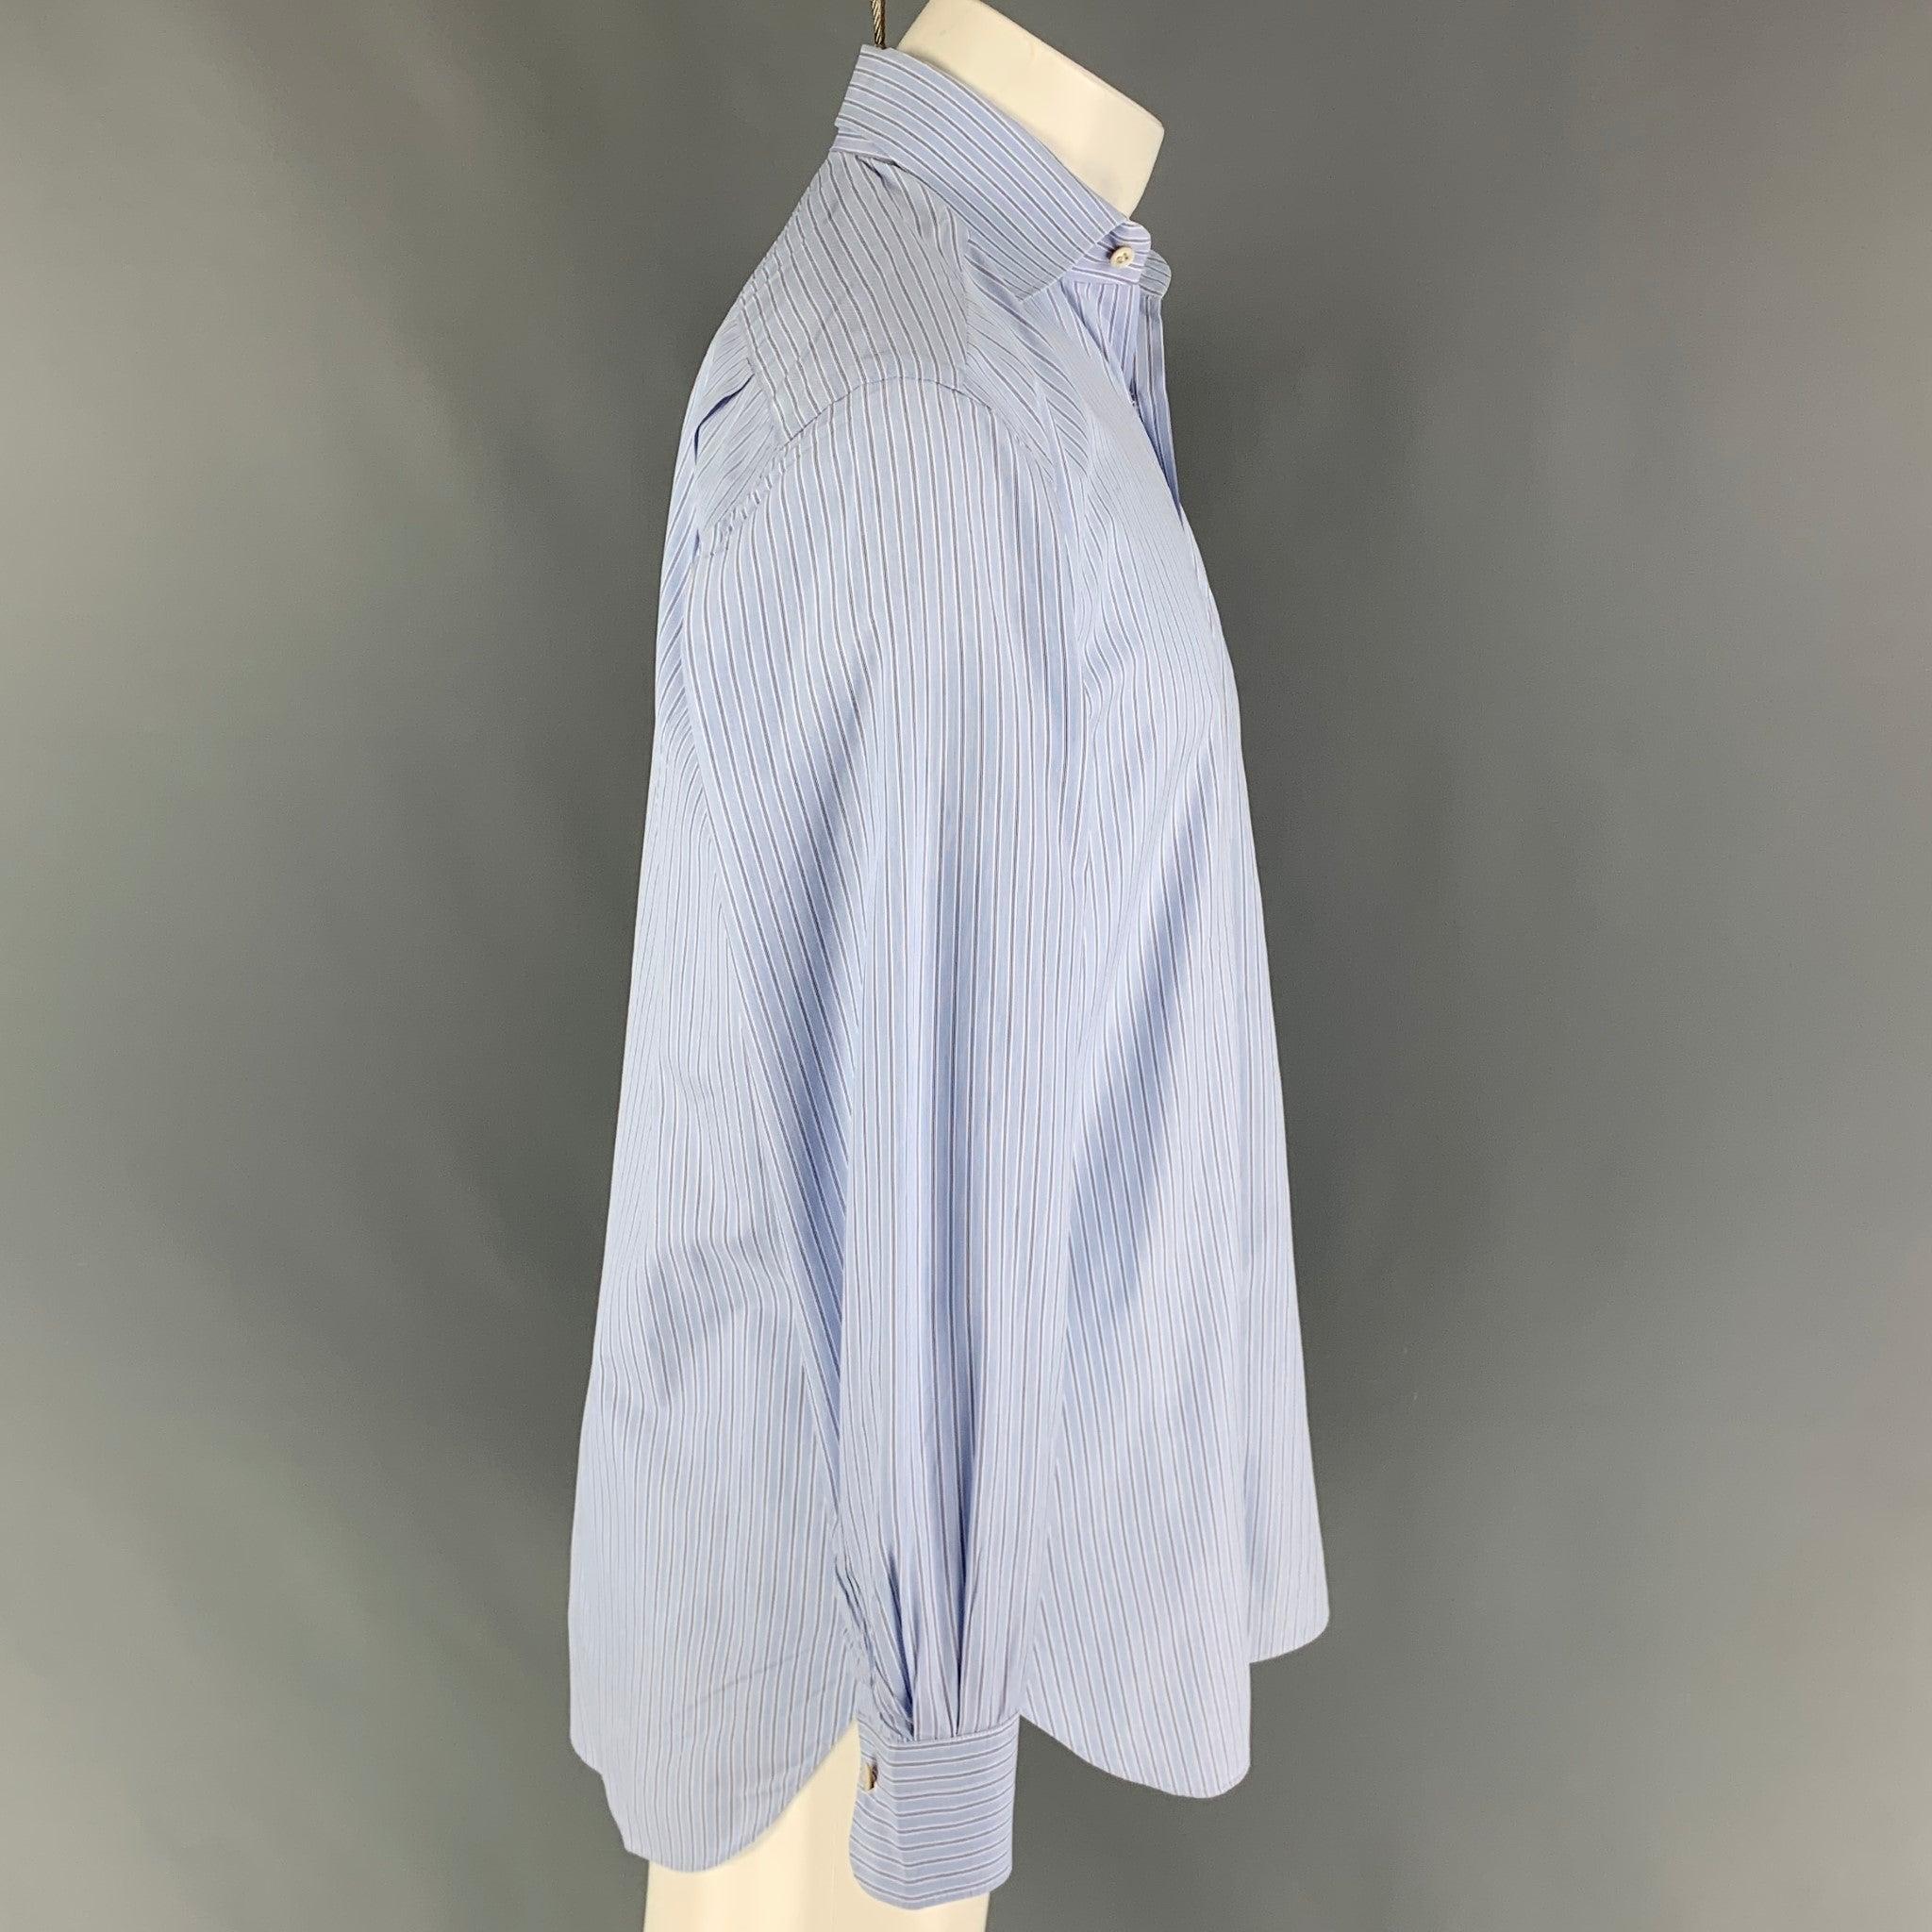 KITON long sleeve shirt comes in a blue & navy stripe cotton featuring a spread collar, patch pocket, and a button up closure. Made in Italy.
Very Good
Pre-Owned Condition.  

Marked:   15.5/39 

Measurements: 
 
Shoulder: 19 inches  Chest: 44